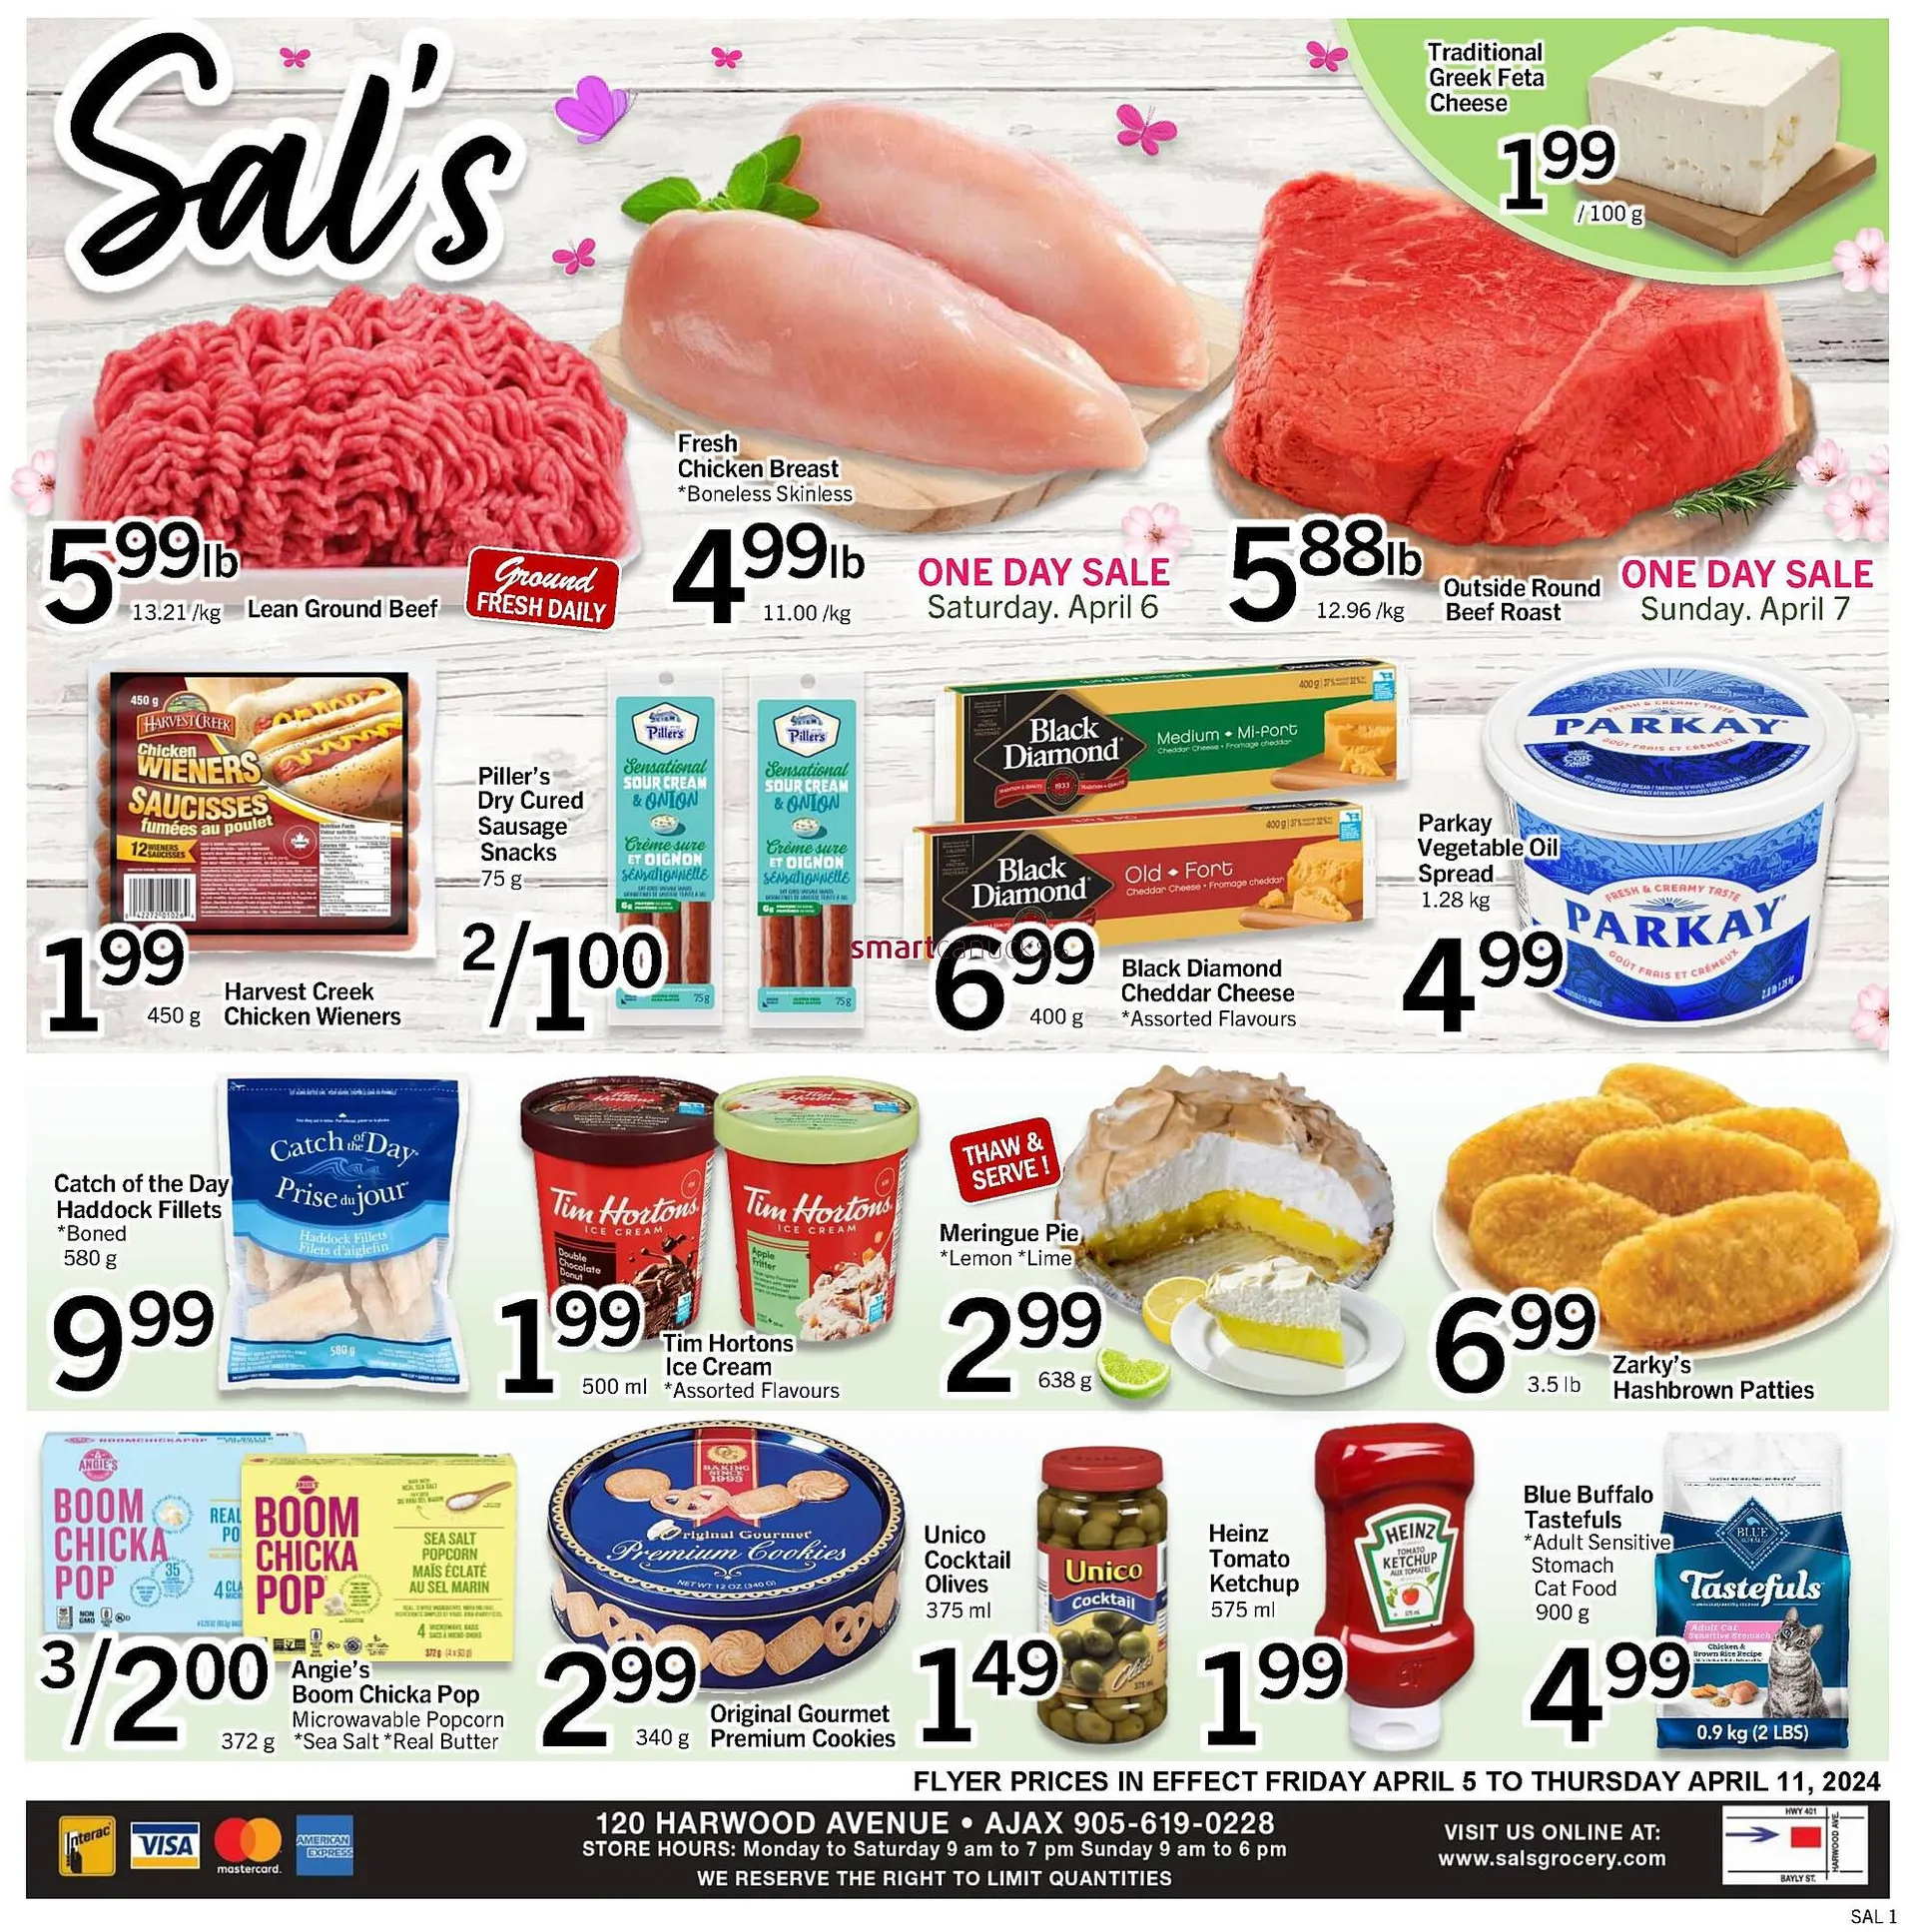 Sal's Grocery flyer from April 5 to April 11 2024 - flyer page 1